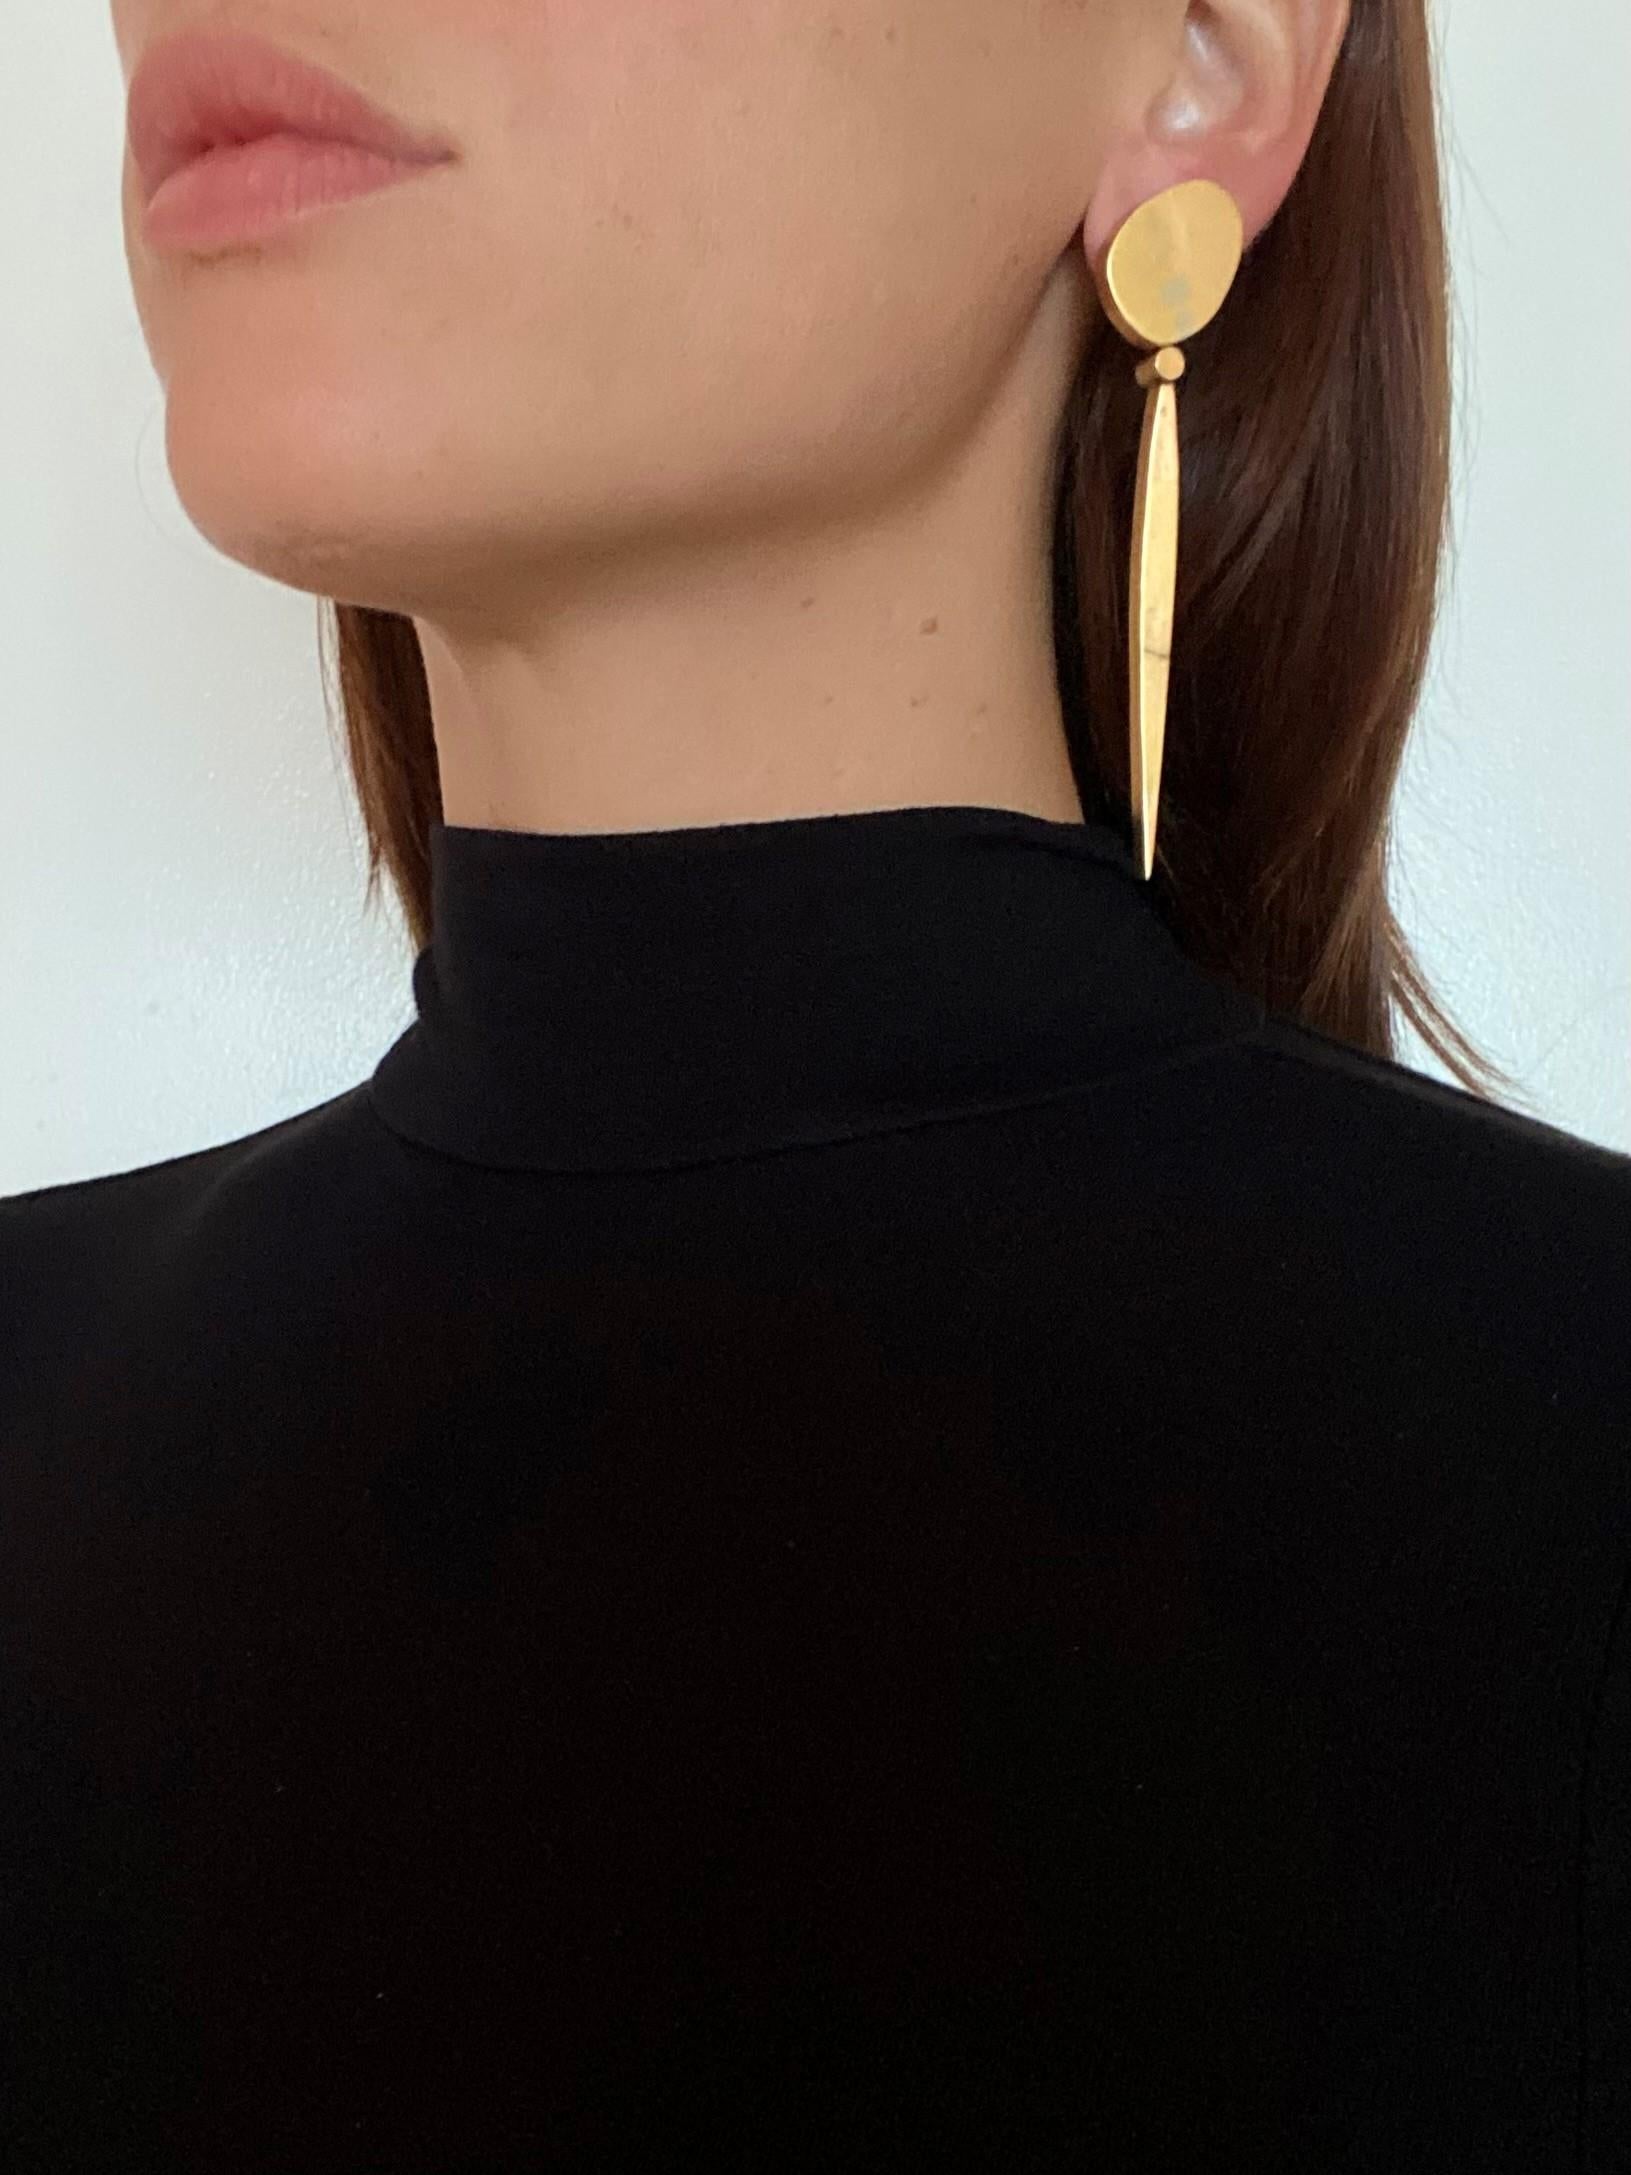 Convertible drop earrings designed by Rena Koopman.

Beautiful one of a king artist studio pieces, created by the artist goldsmith Rena Koopman. These convertible day and night drop earrings has been crafted in solid yellow gold of 18 karats with